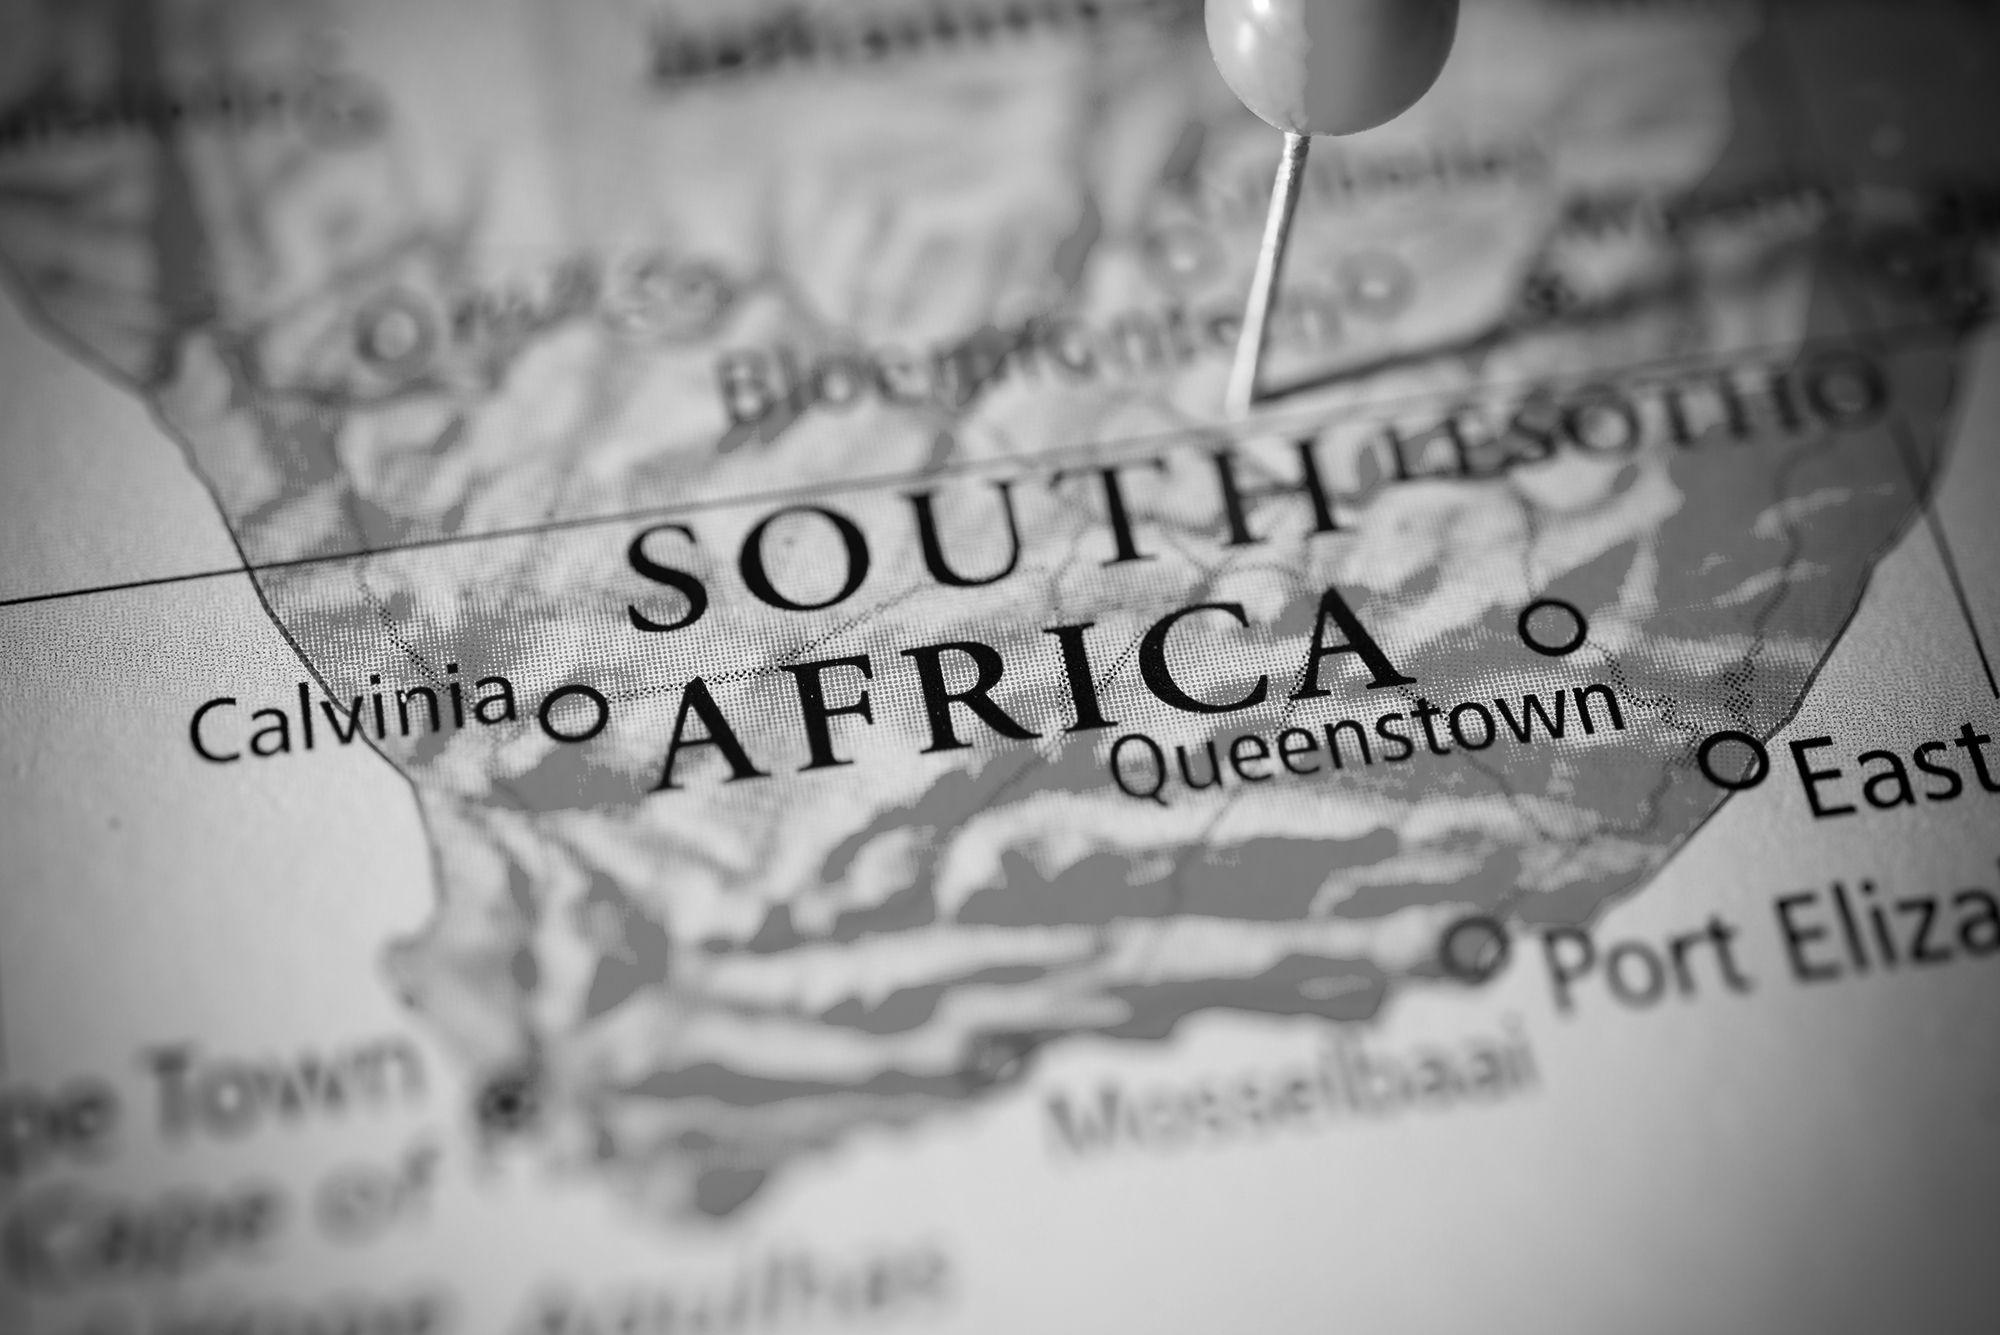 TrackWizz reaches South Africa